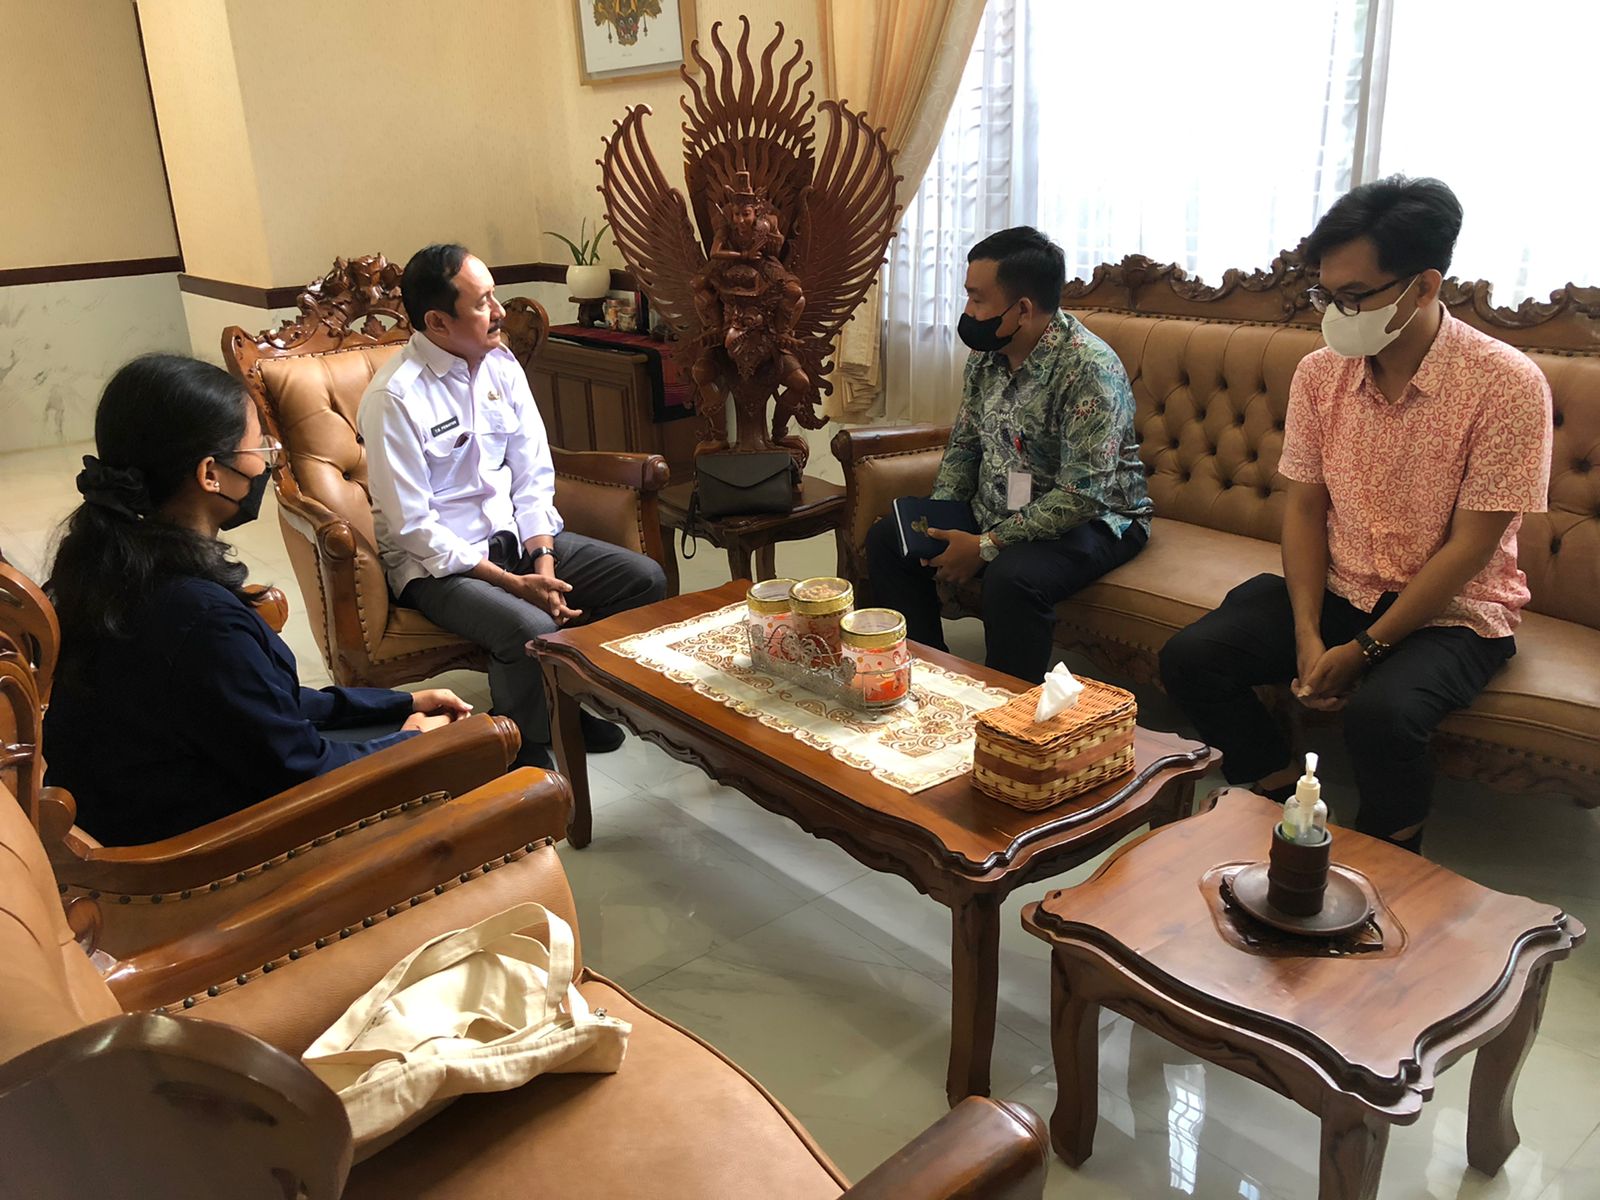 Collaborating with the MBKM Partnership Program between the Faculty of Social and Political Sciences, Udayana University and the Bali Provincial Tourism Office